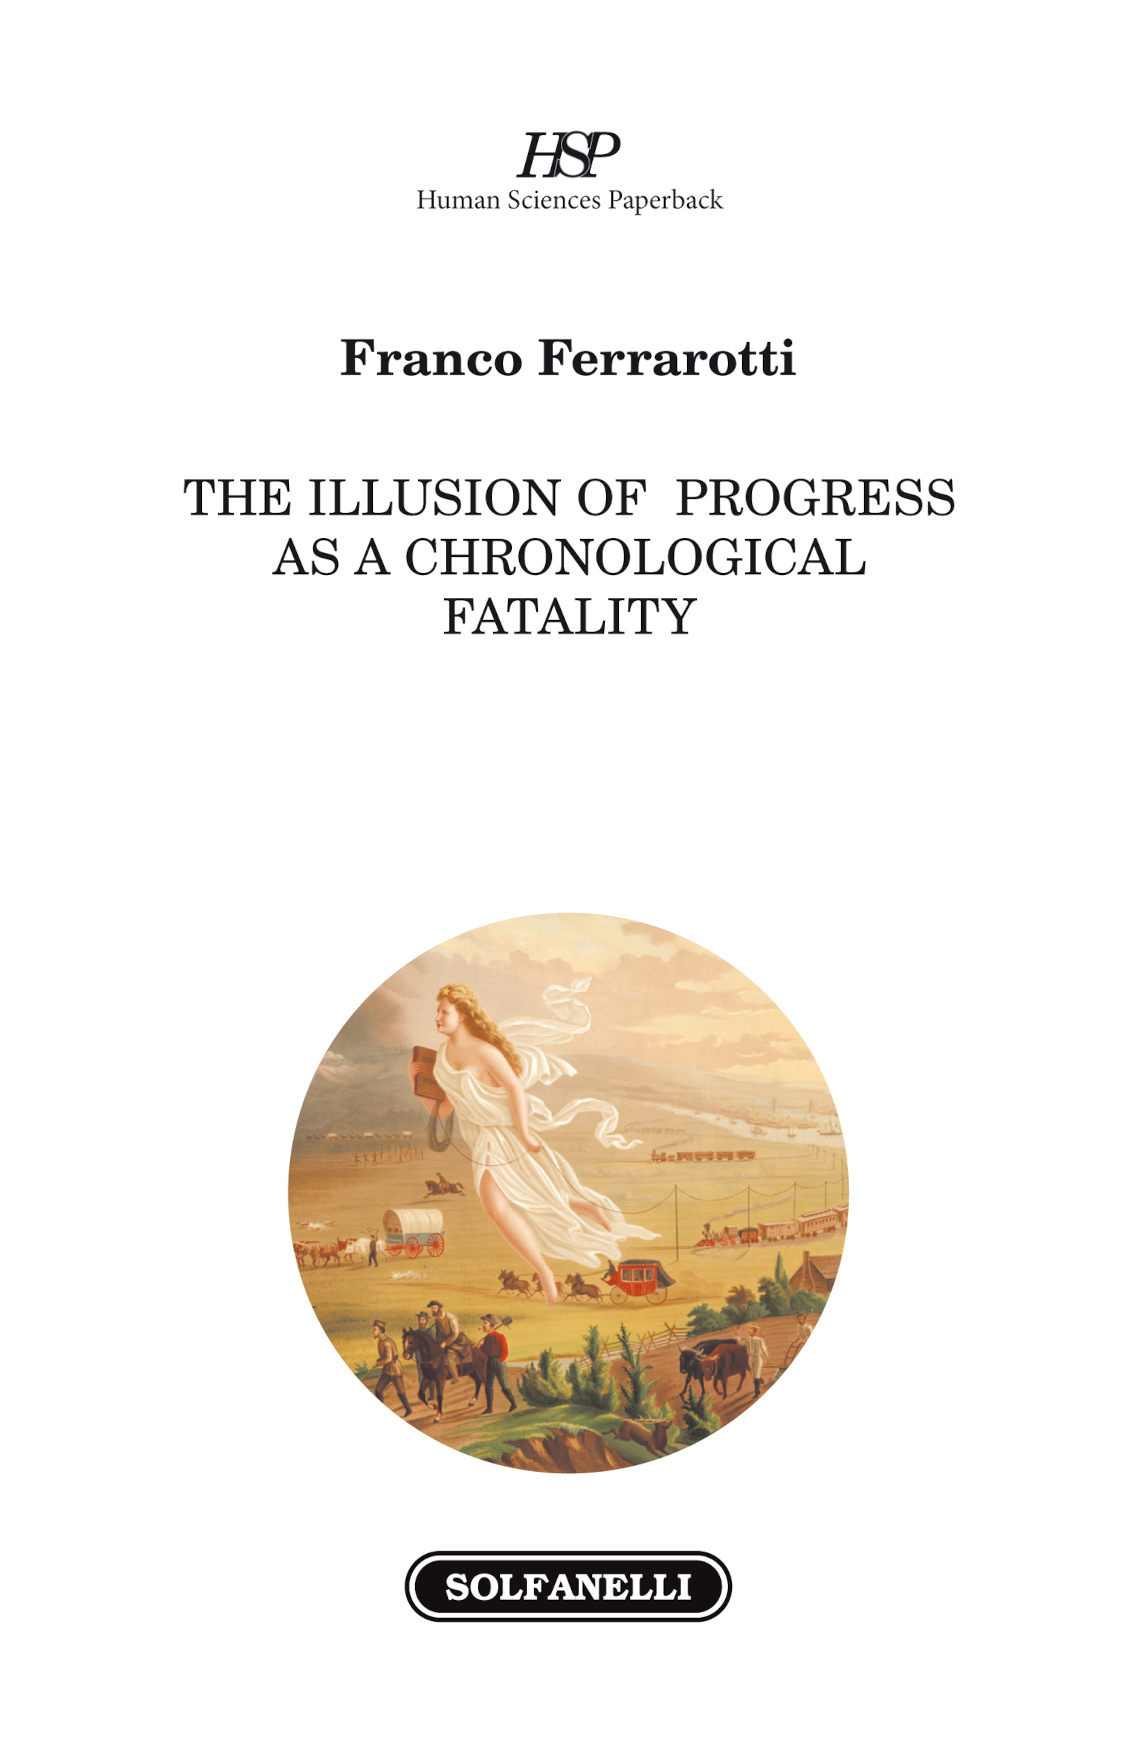 THE ILLUSION OF PROGRESS AS A CHRONOLOGICAL FATALITY